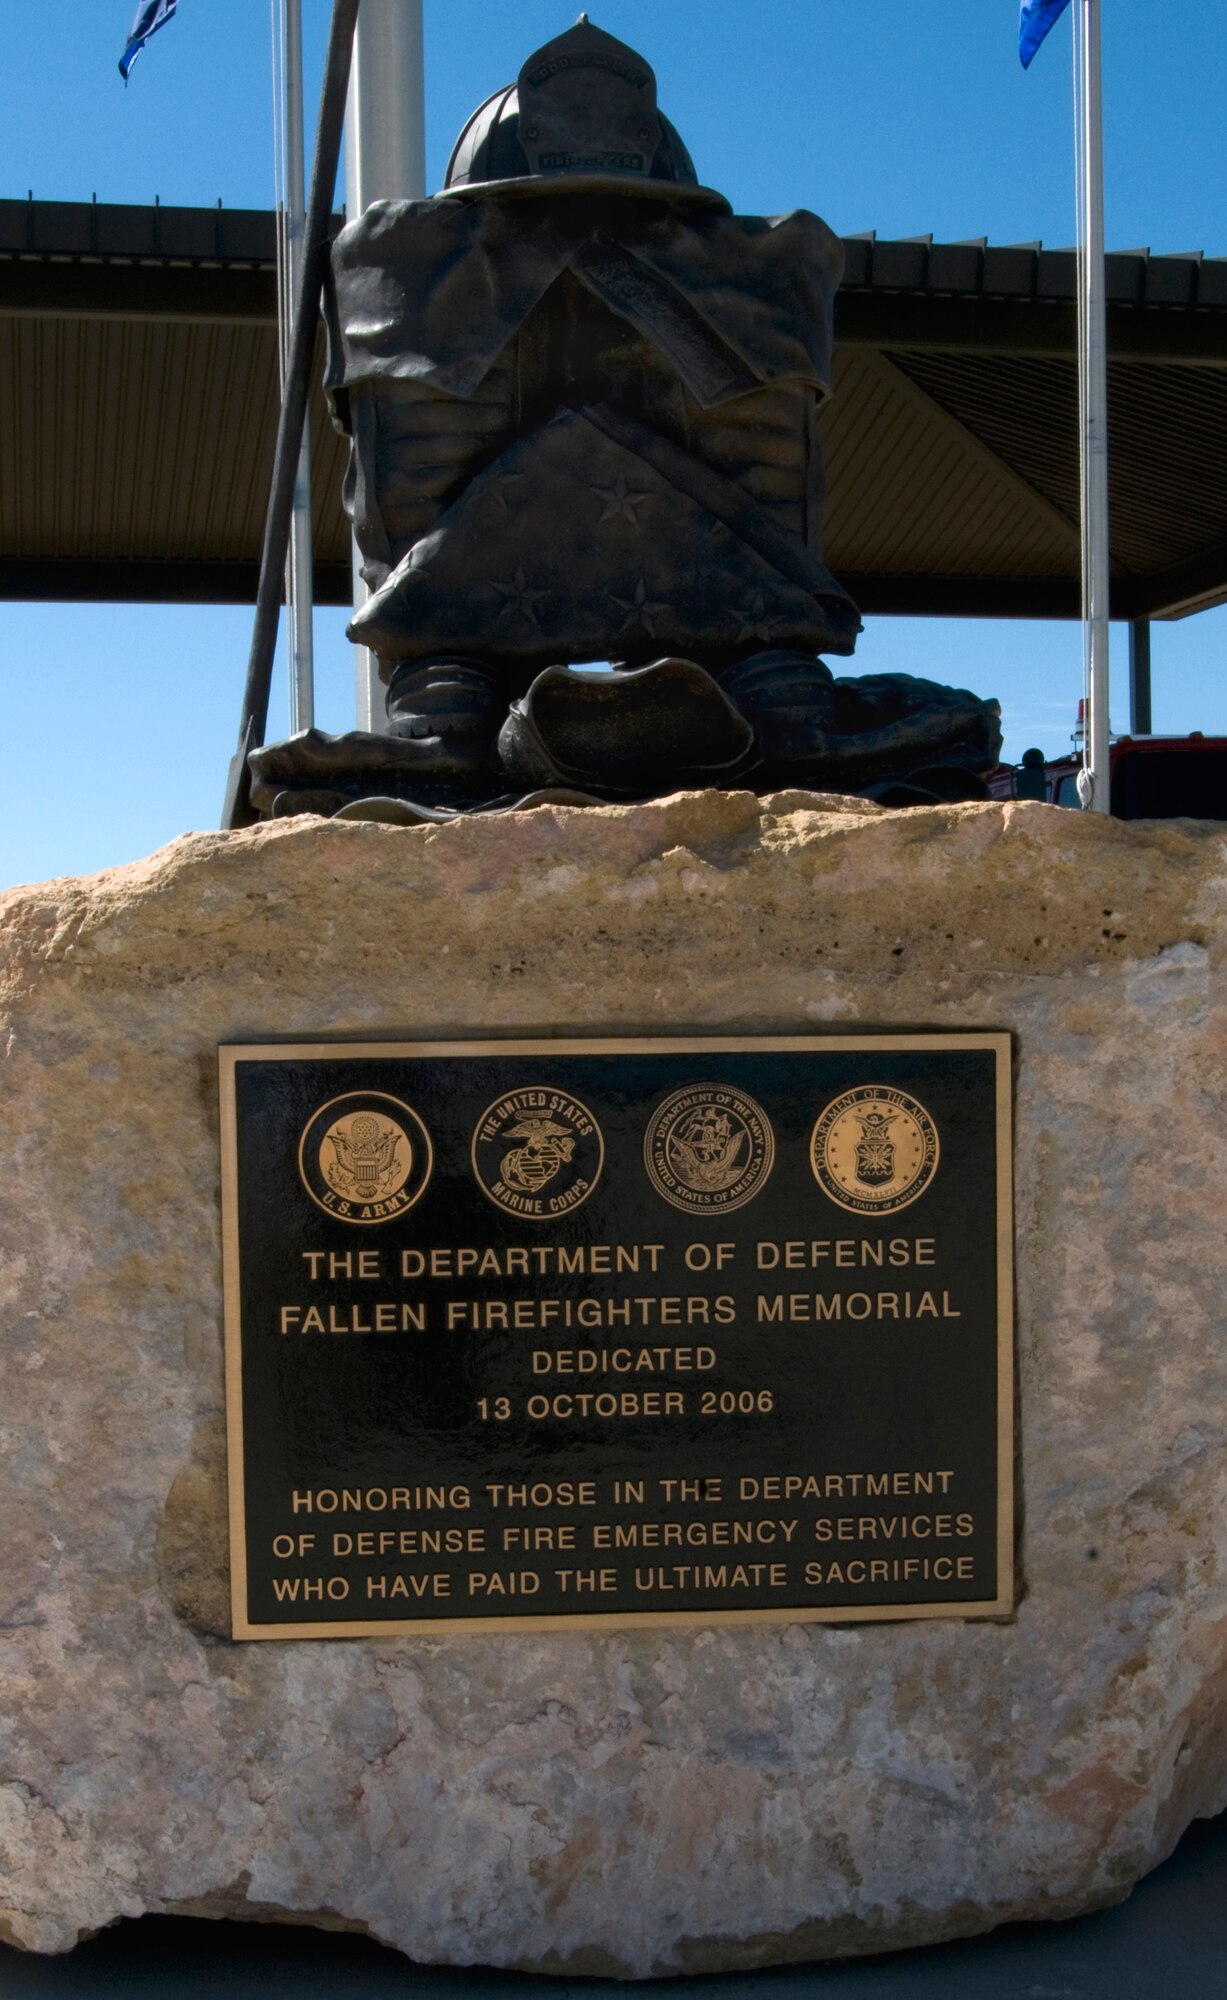 GOODFELLOW AIR FORCE BASE, Texas – The Department of Defense dedicated a memorial here honoring all fallen firefighters in the DOD Fire Emergency Service  2006. Today, there are 14 vehicles: 0-11, P-2, P-4, P-15, 0-6, Ansul Dry Chemical Fire Jeep, P-12 Telesquirt, International Pumper, 530b, R-2, Iveco Magirus Ladder Truck, 2500l Macy, 1942 Ford pumper, 1941 Mack 0-4 and a HH-43 Pedro Helicopter. (U.S. Air Force photo/ Senior Airman Tong Duong)